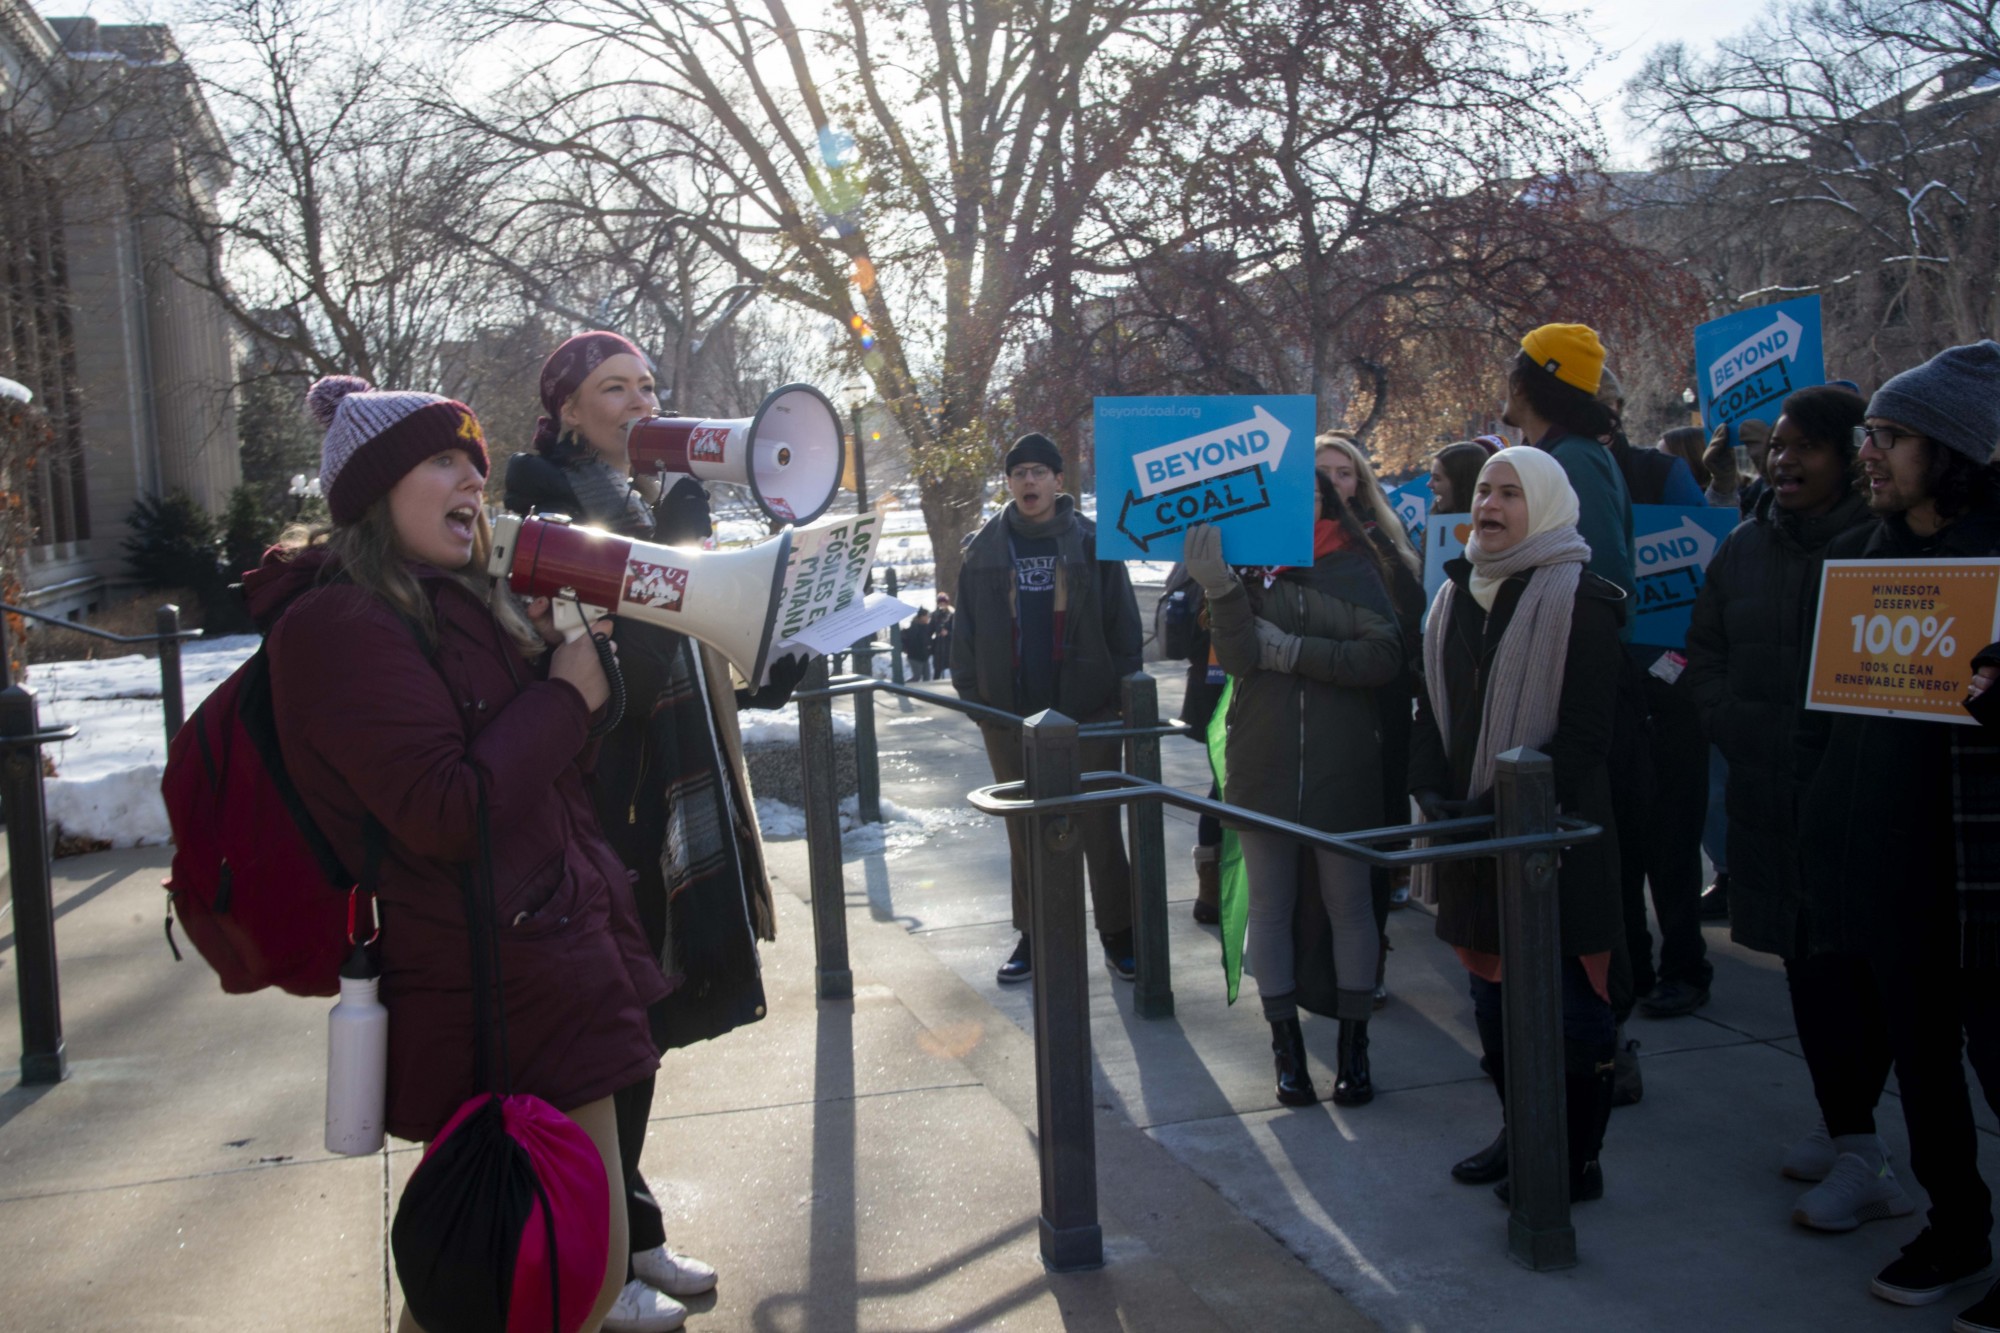 Savannah Wery, left, and Katherine Schmid, right, speak to protesters participating in the UMN Climate Strike outside of Morrill Hall on Friday, Dec. 6. Those in attendance criticized the University’s policies on fossil fuel usage.